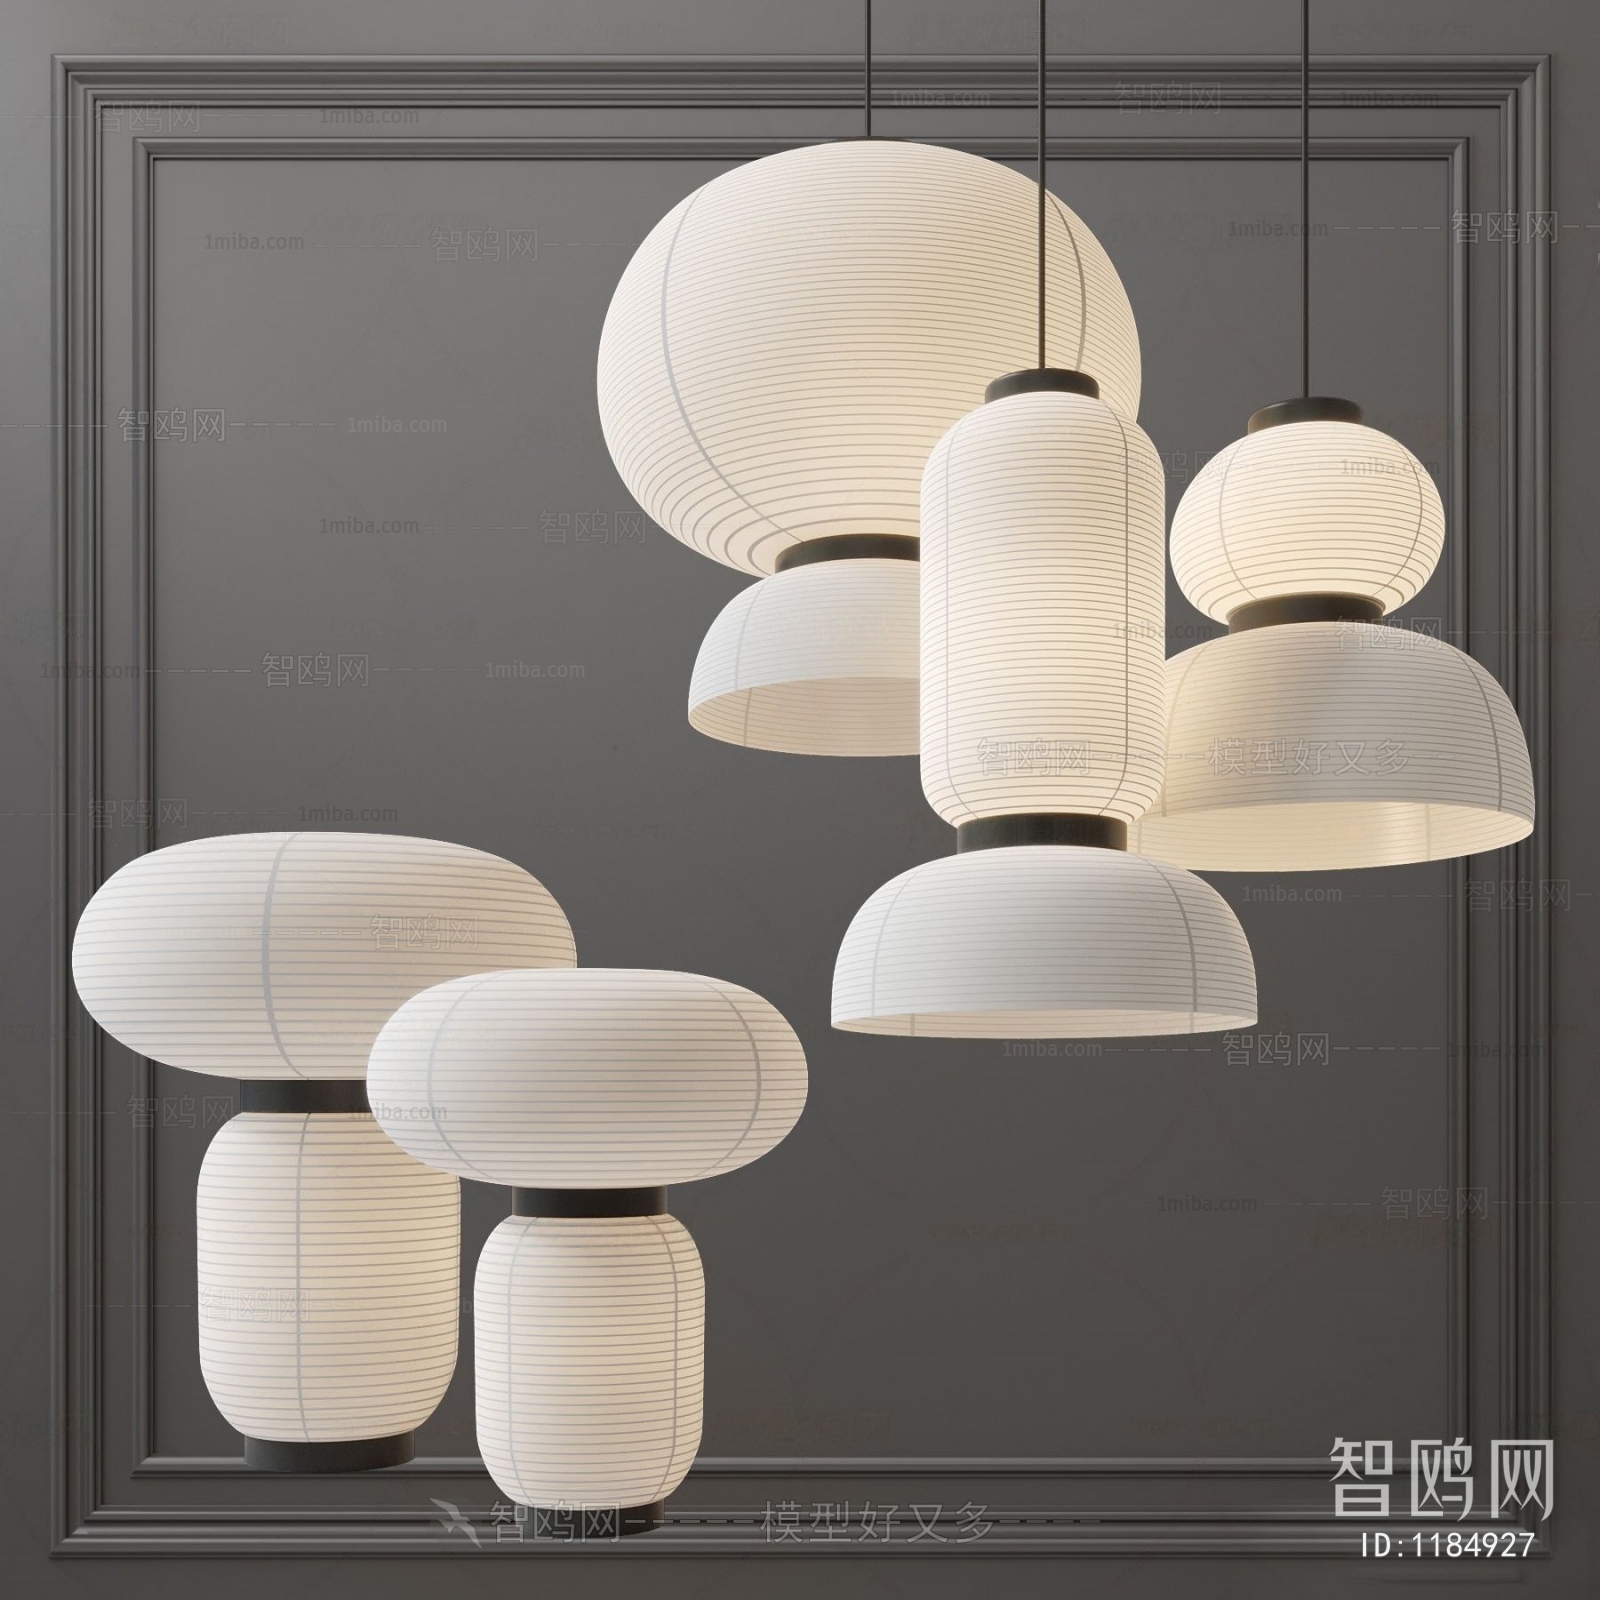 New Chinese Style Table Lamp